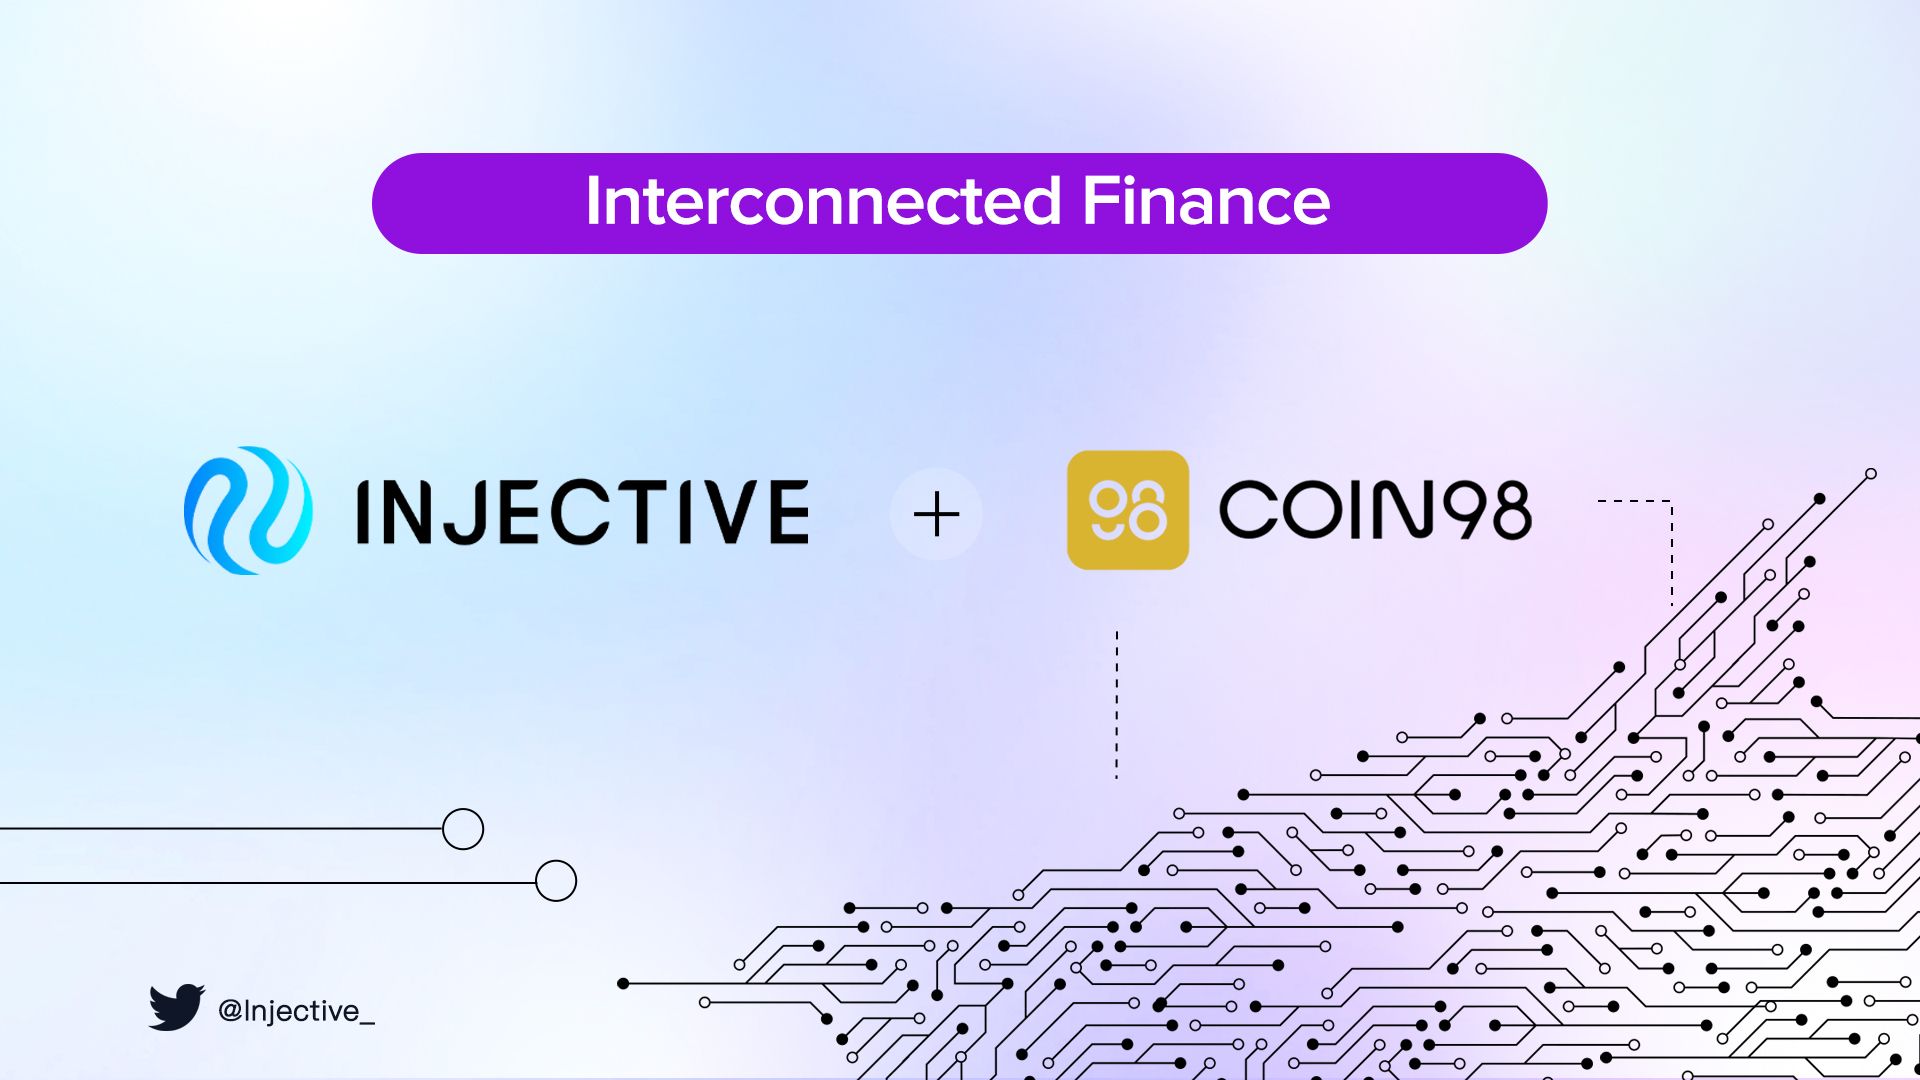 Coin98 Integrates Injective to Bring Millions of Users into a New World of Interconnected Finance